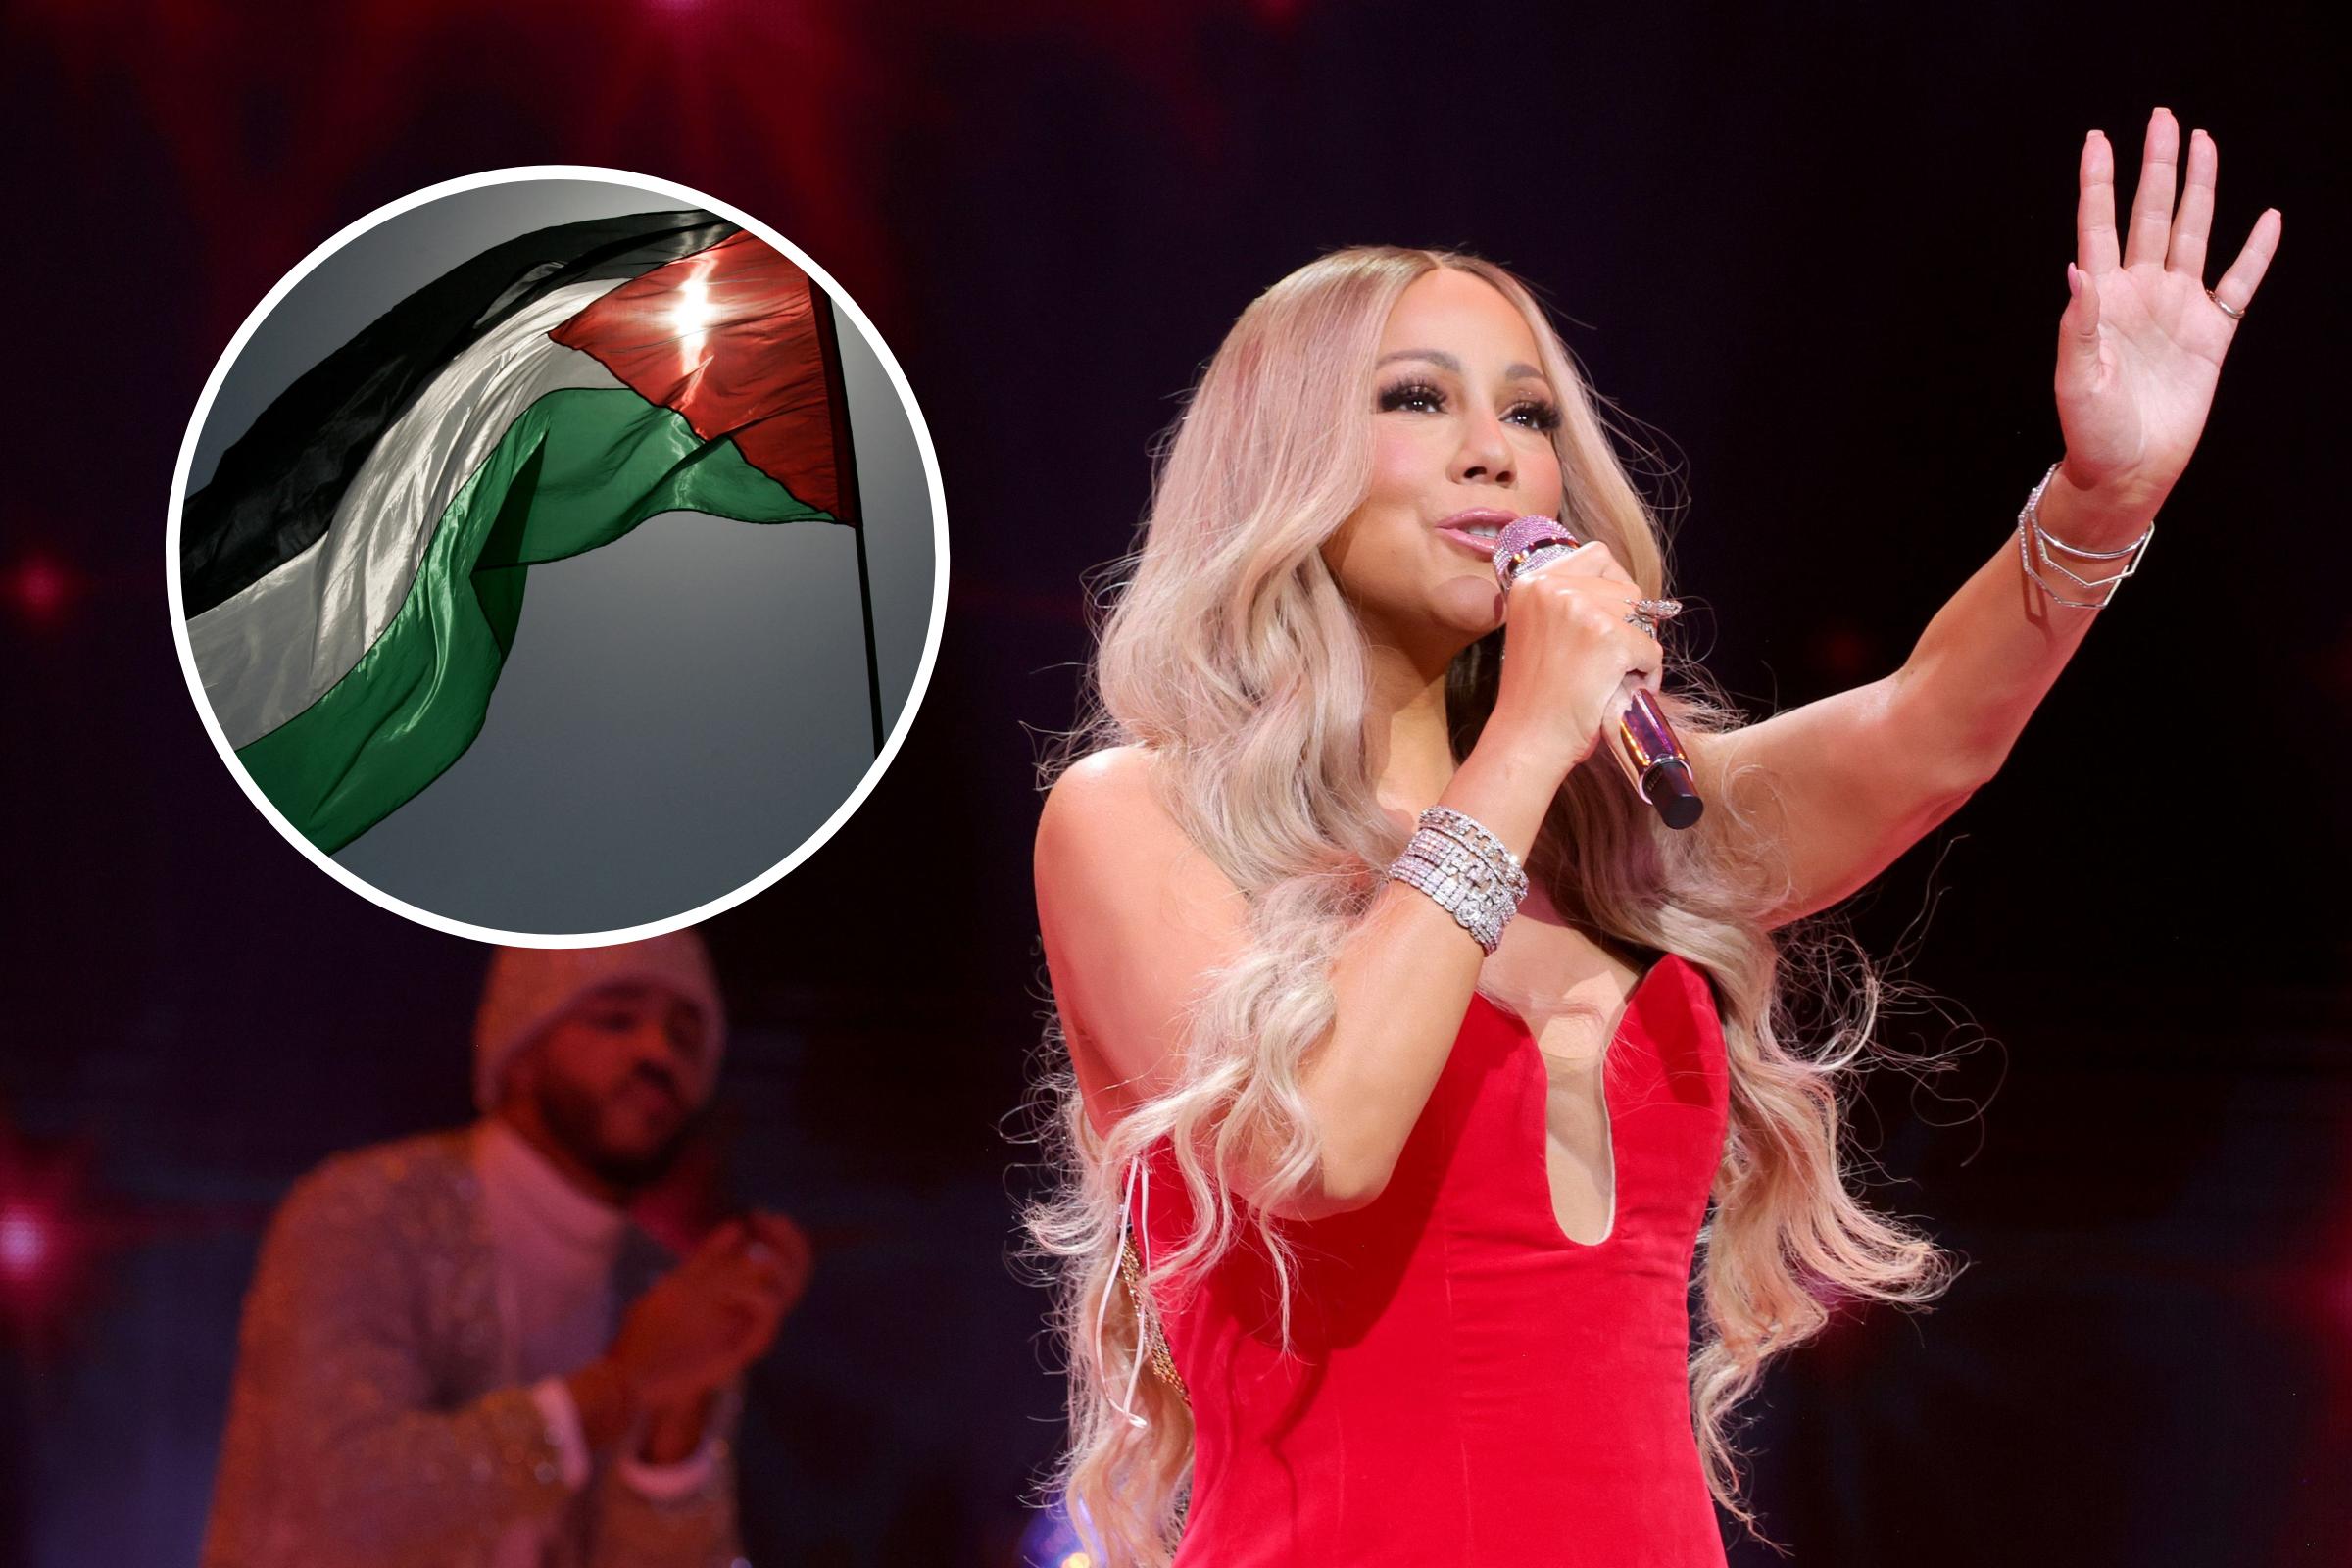 Mariah Carey Fan Claims She Was Blocked From Concert Over Palestinian Scarf